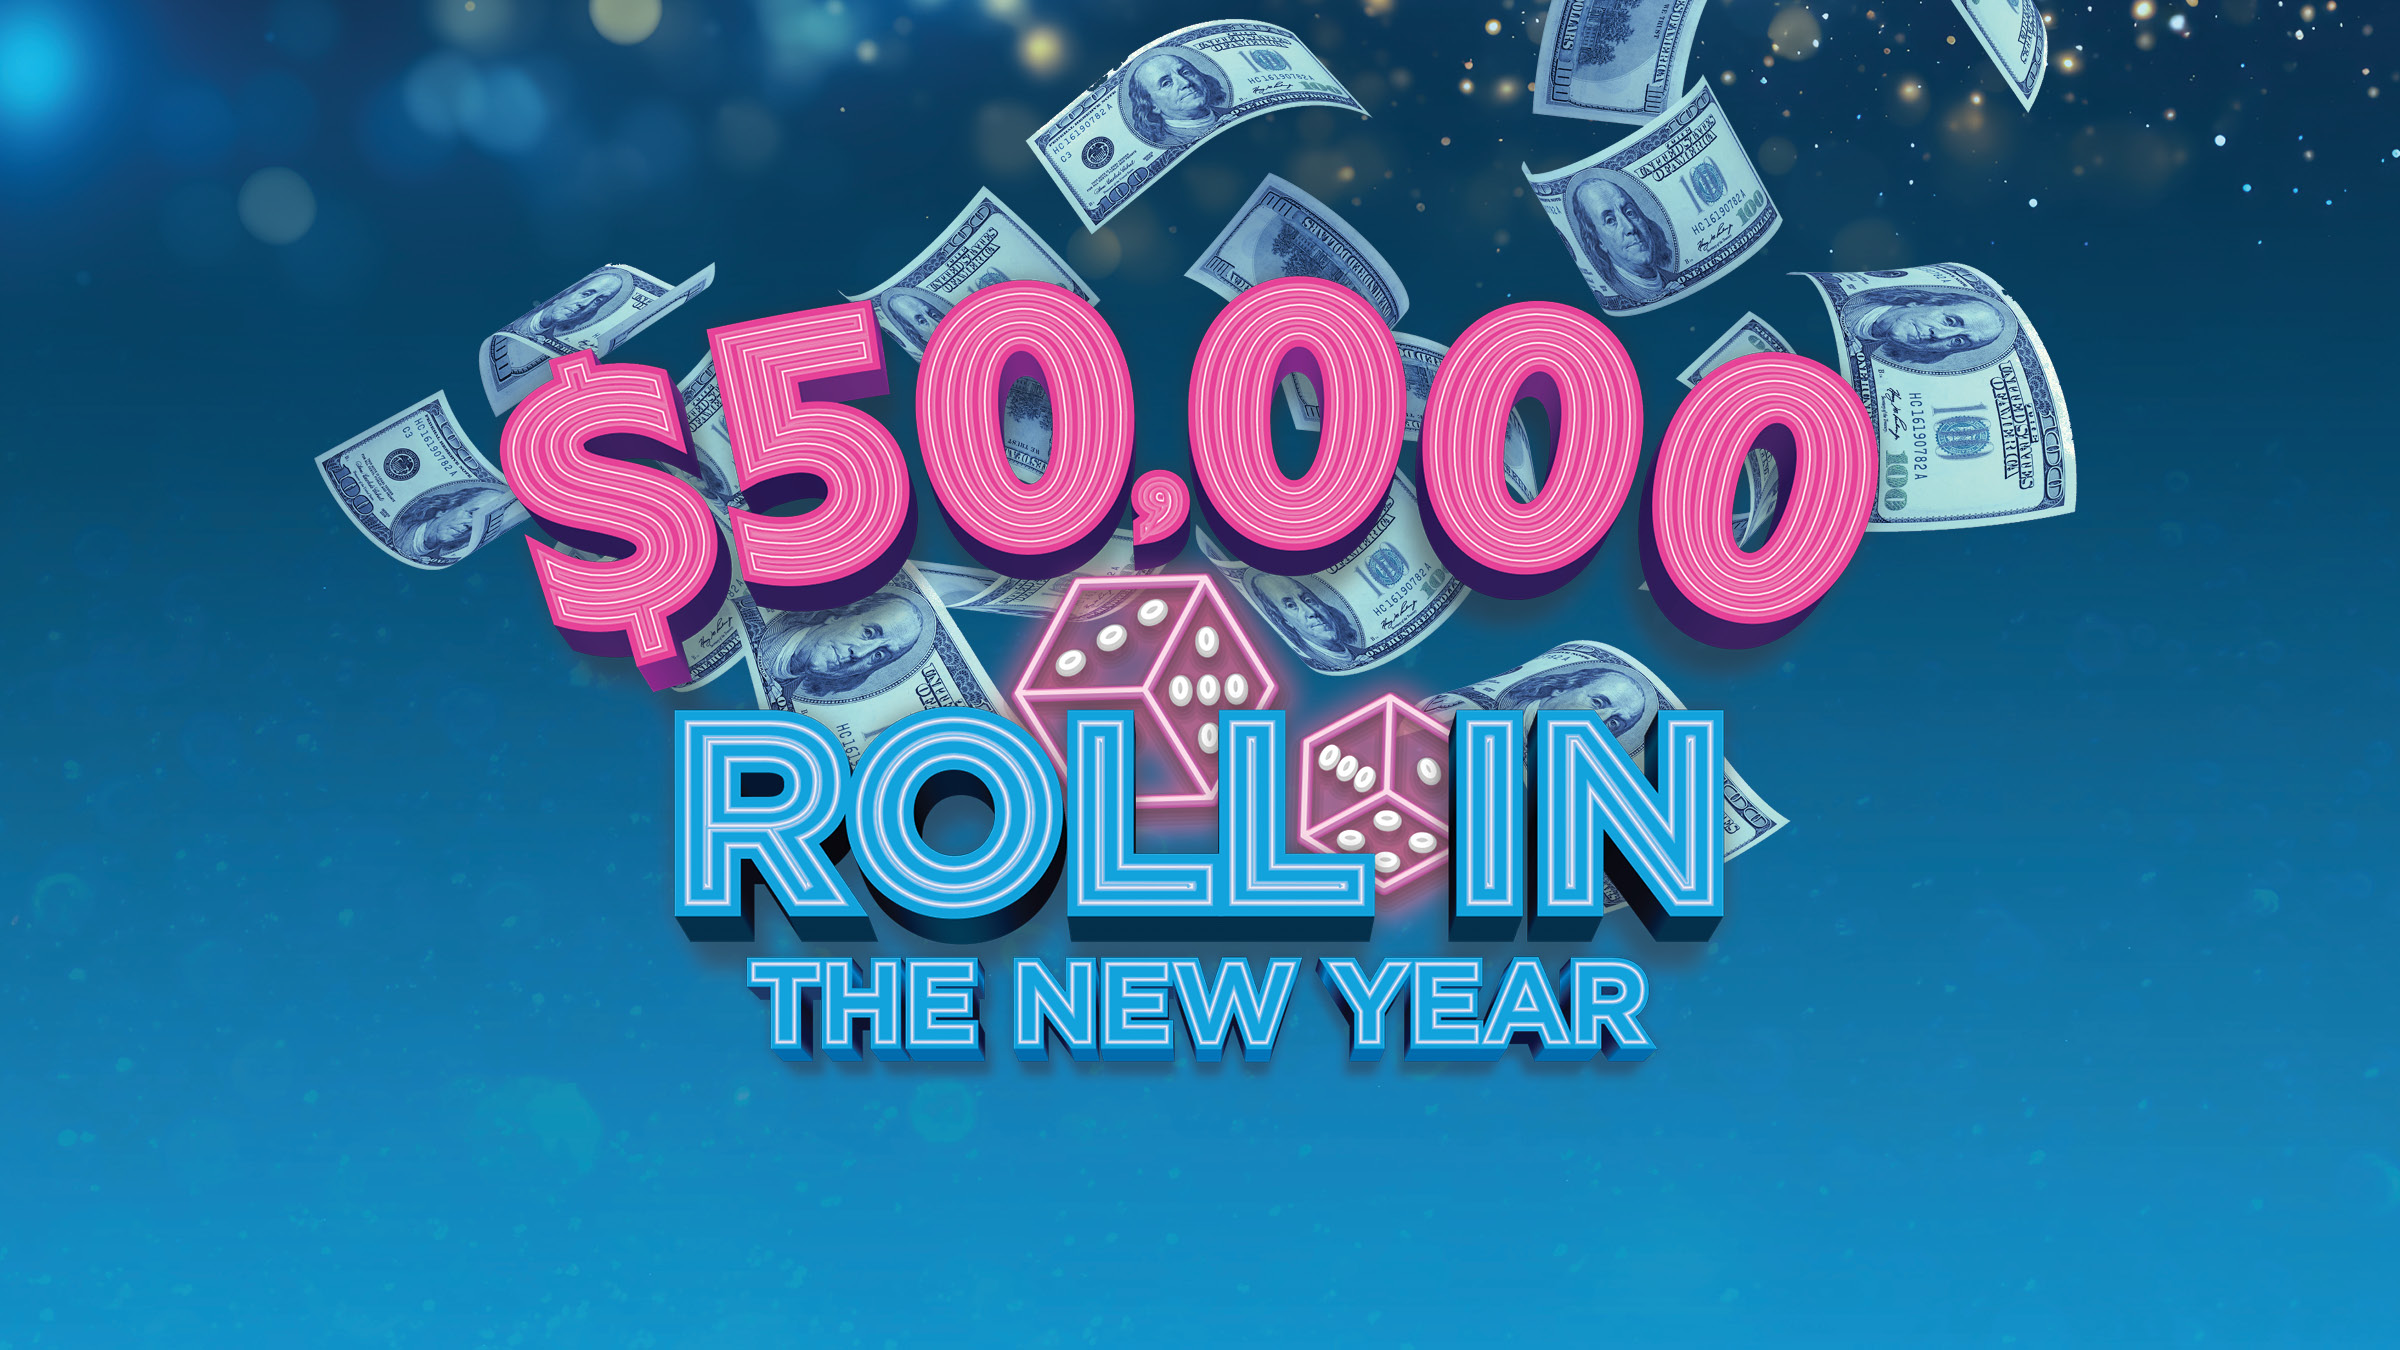 $50,000 Roll In The New Year